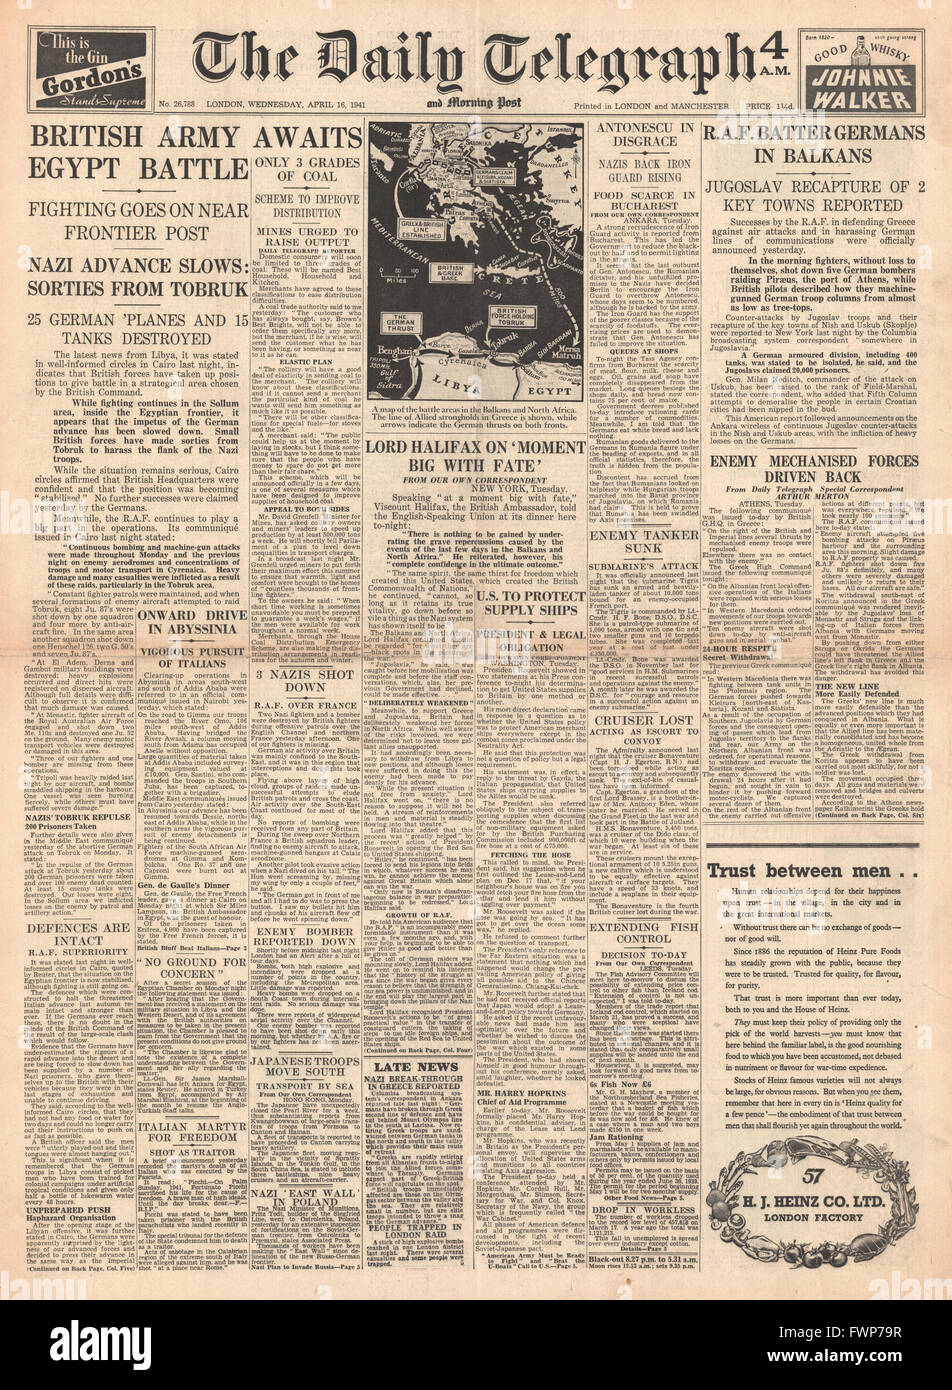 1941 front page Daily Telegraph British Army awaits Egypt battle and RAF attack German forces in the Balkans Stock Photo